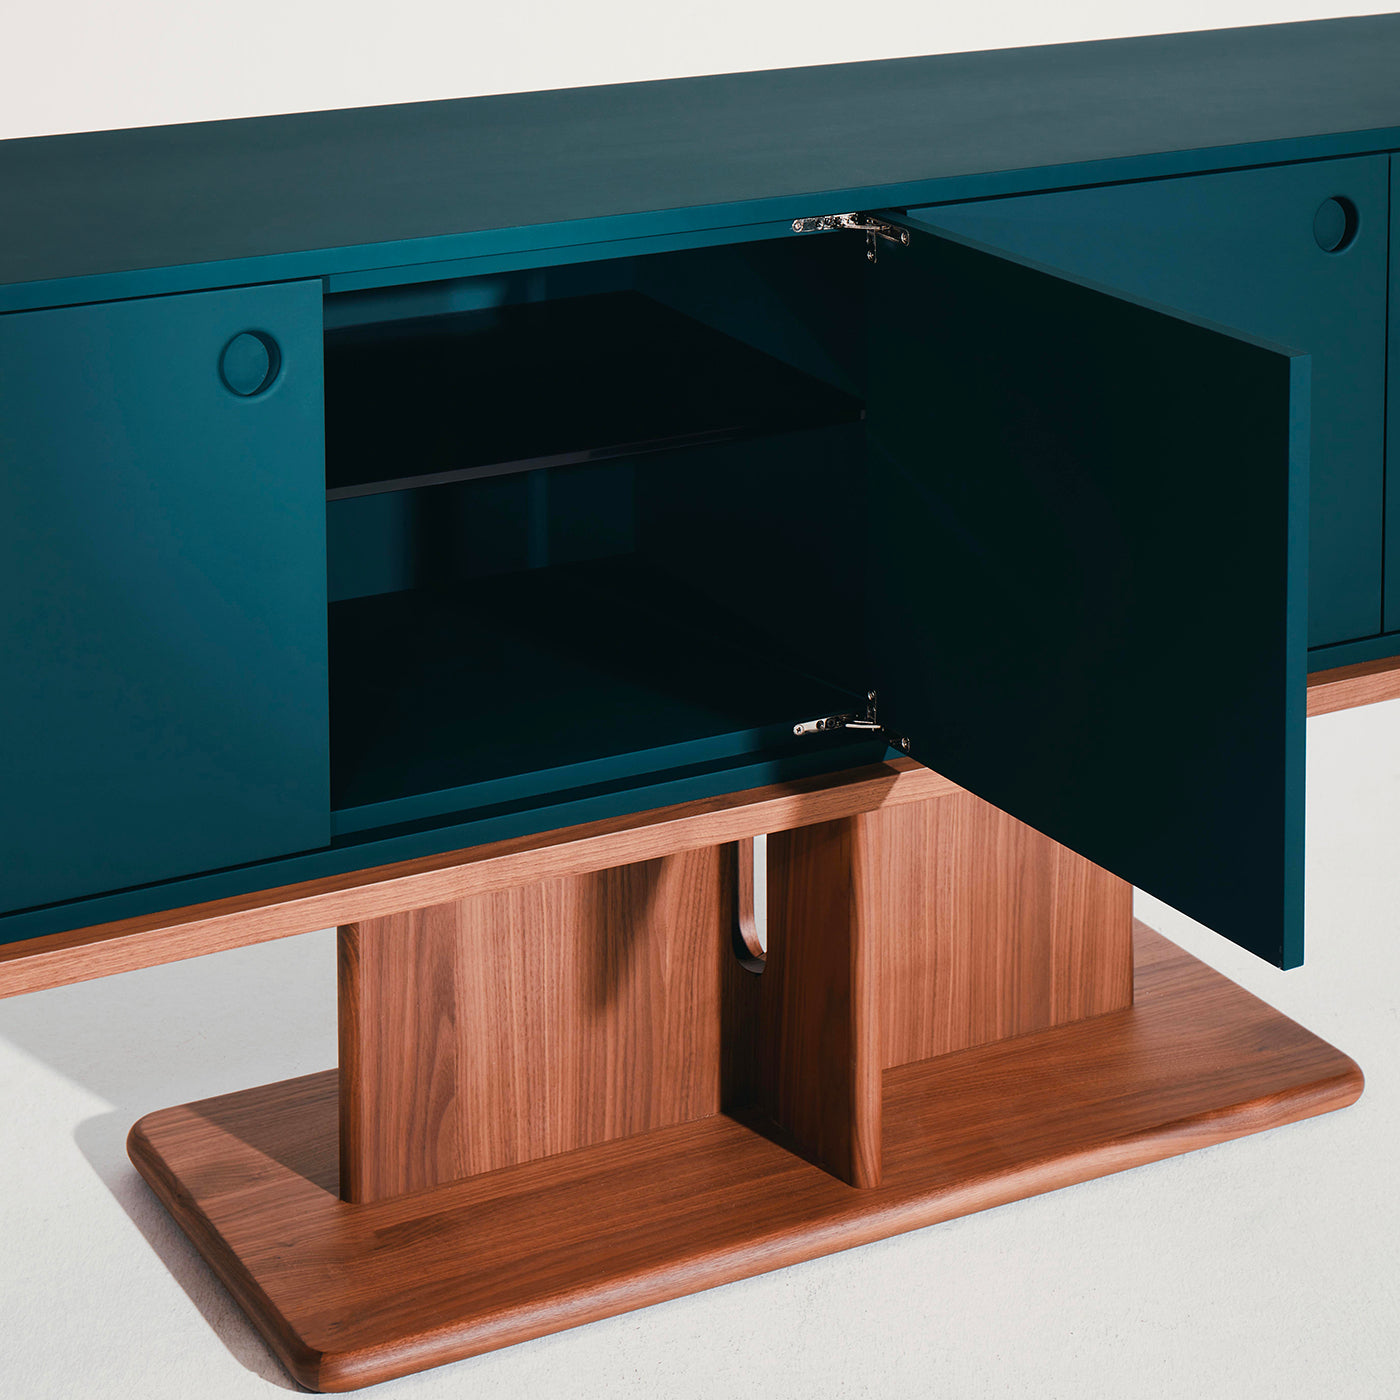 Intersection Sideboard by Neri&Hu - Alternative view 3